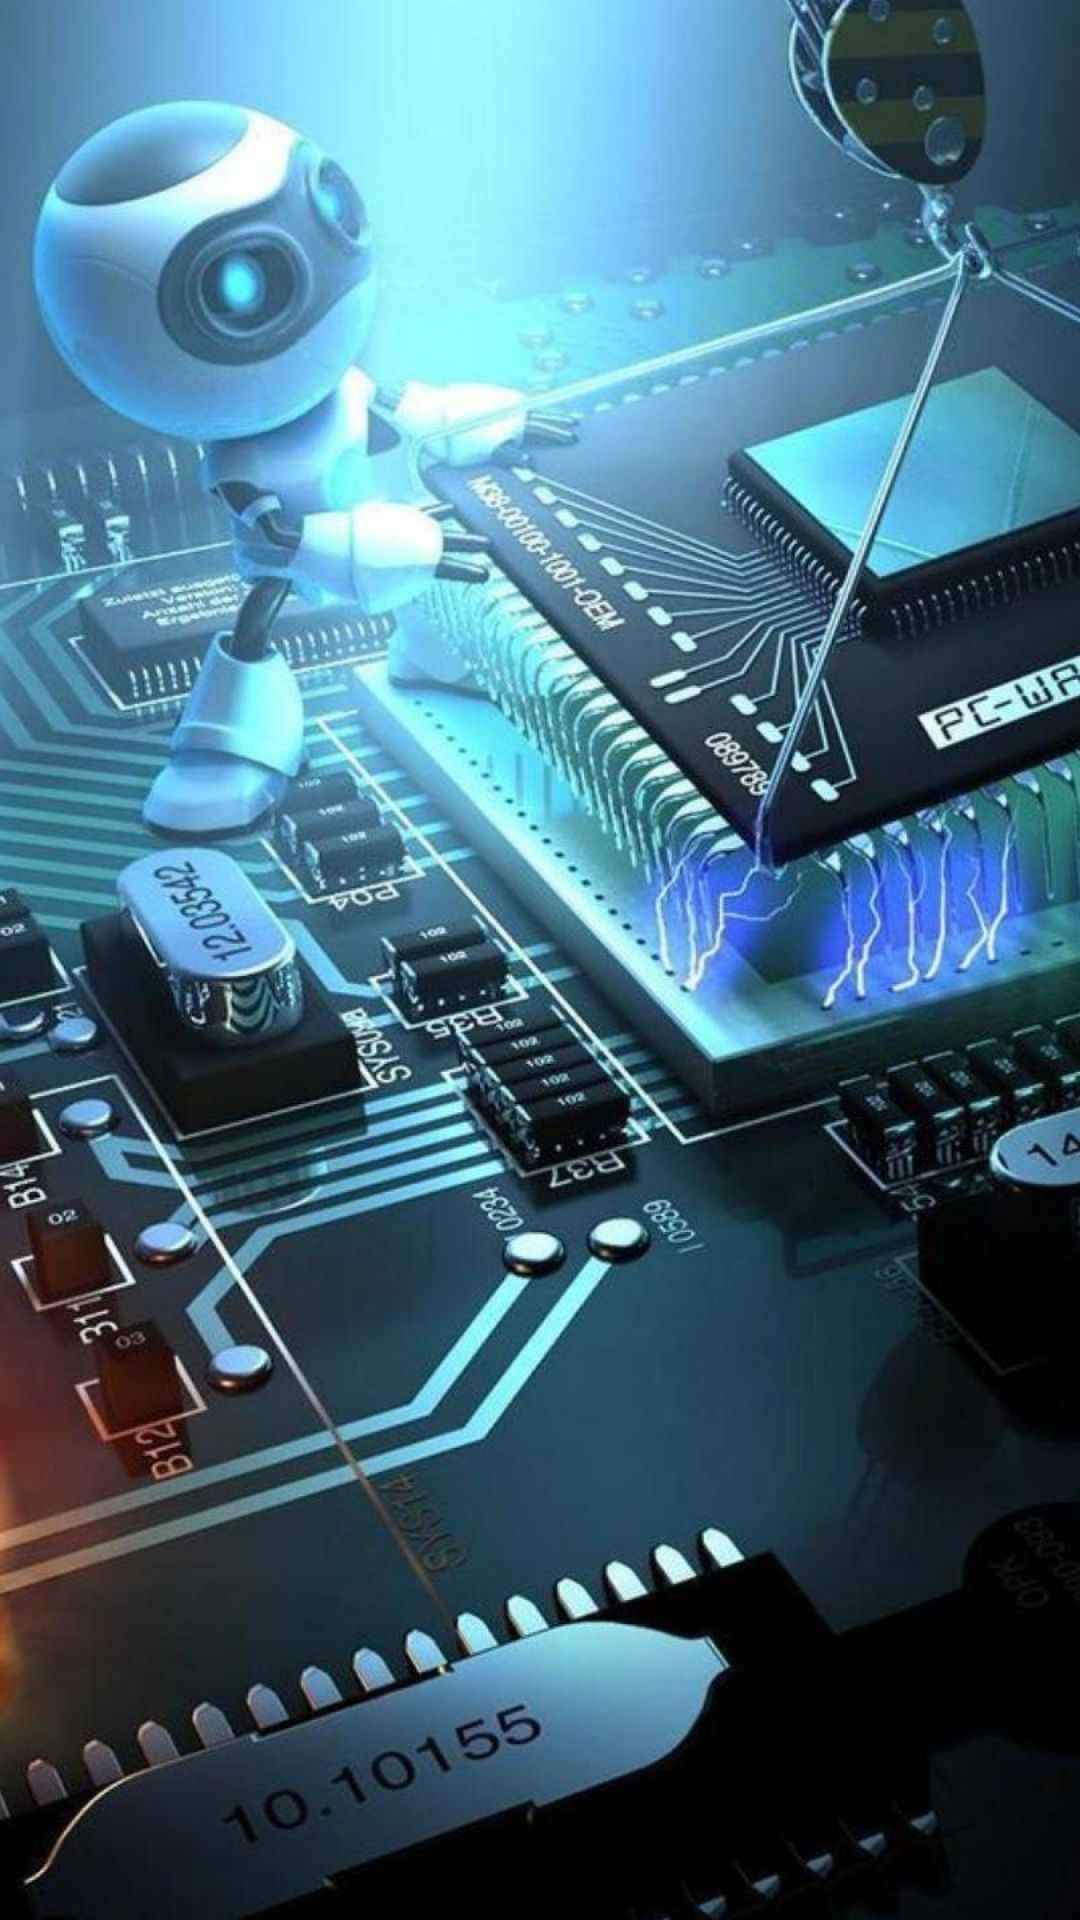 Electronic Engineering Wallpaper for Android Mobile Smartphone [Full HD]